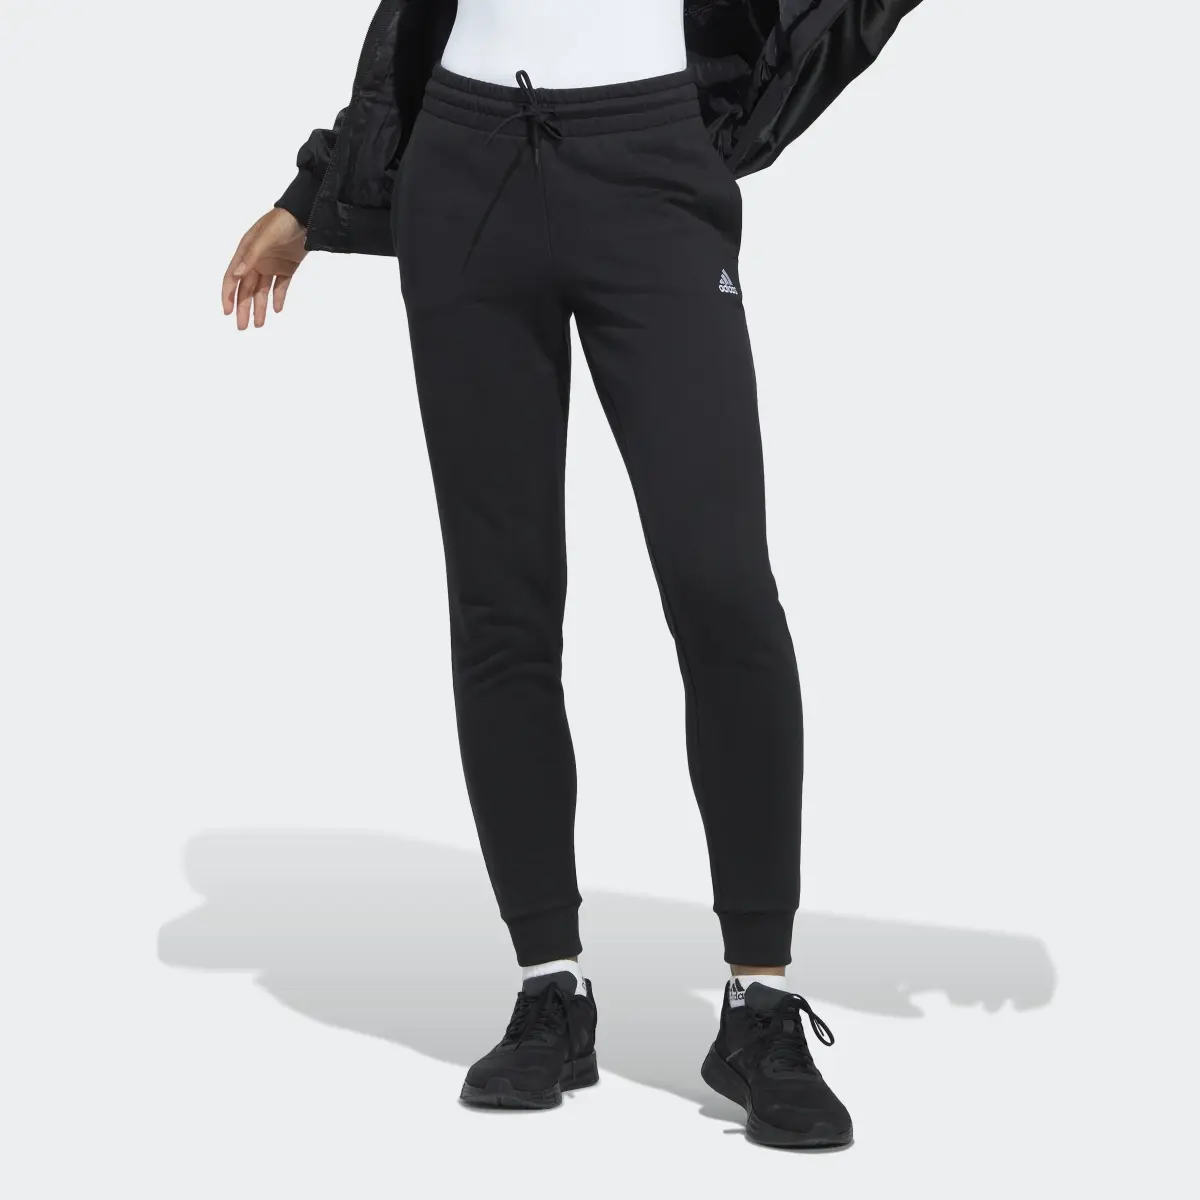 Adidas Essentials Linear French Terry Cuffed Pants. 3